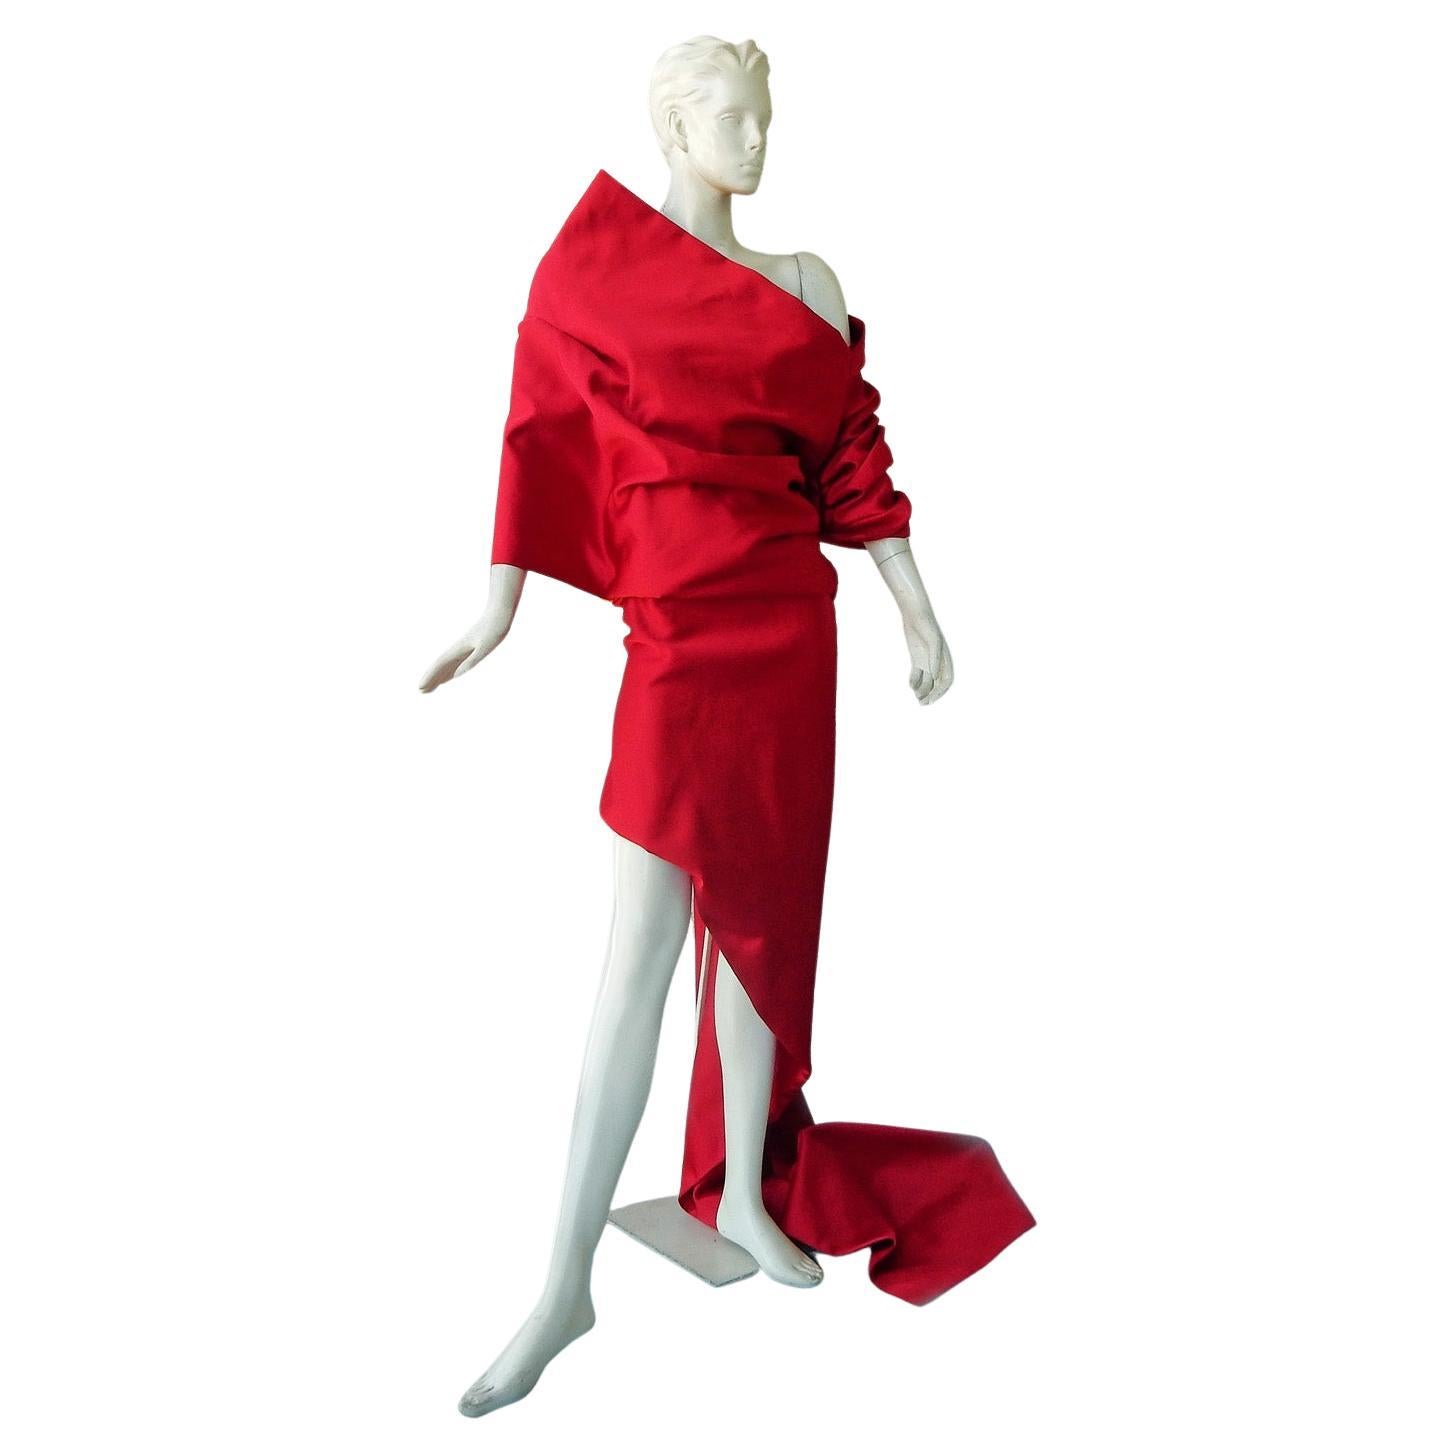 Balenciaga Runway "Lady in Red" Asymmetric Structured Dress Gown   For Sale